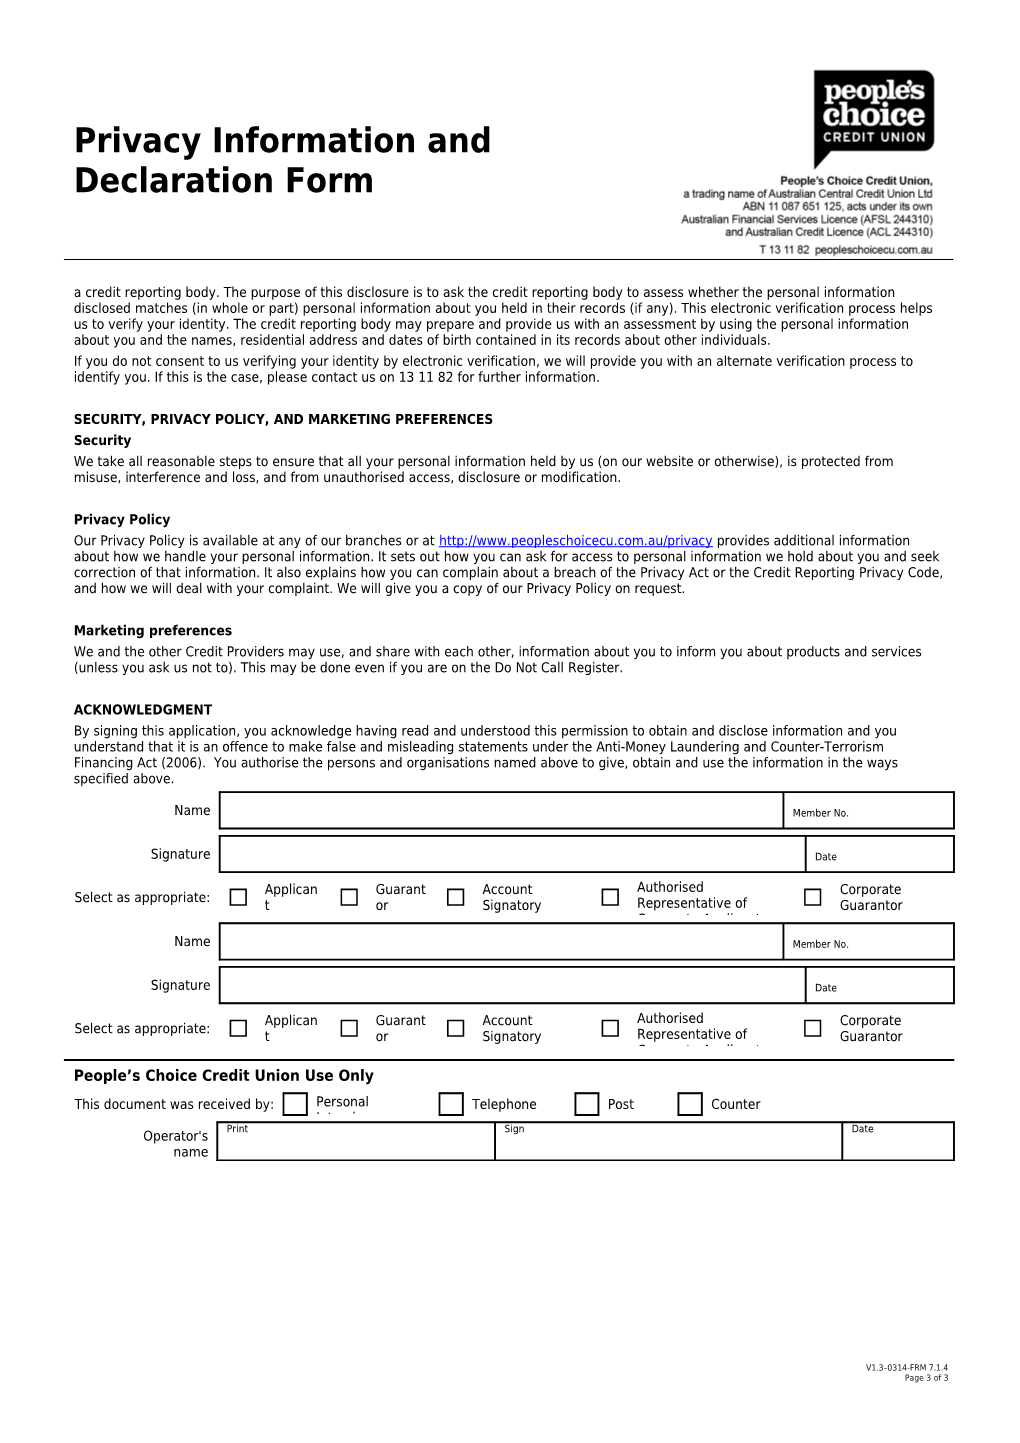 Privacy Information and Declaration Form